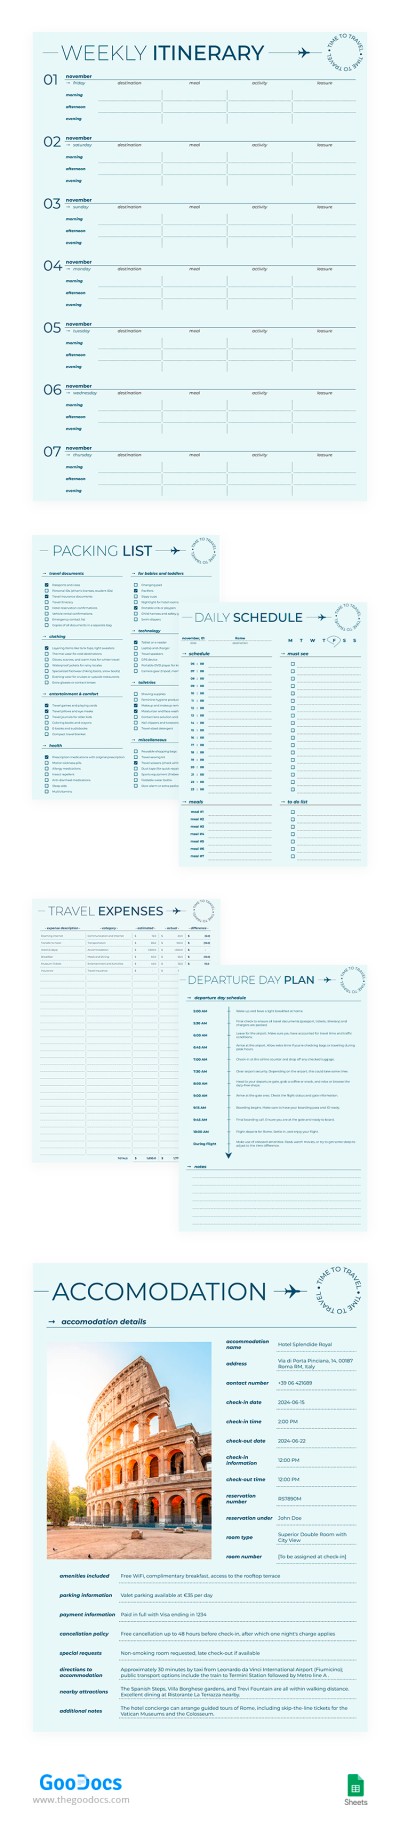 Professional Travel Itinerary Template